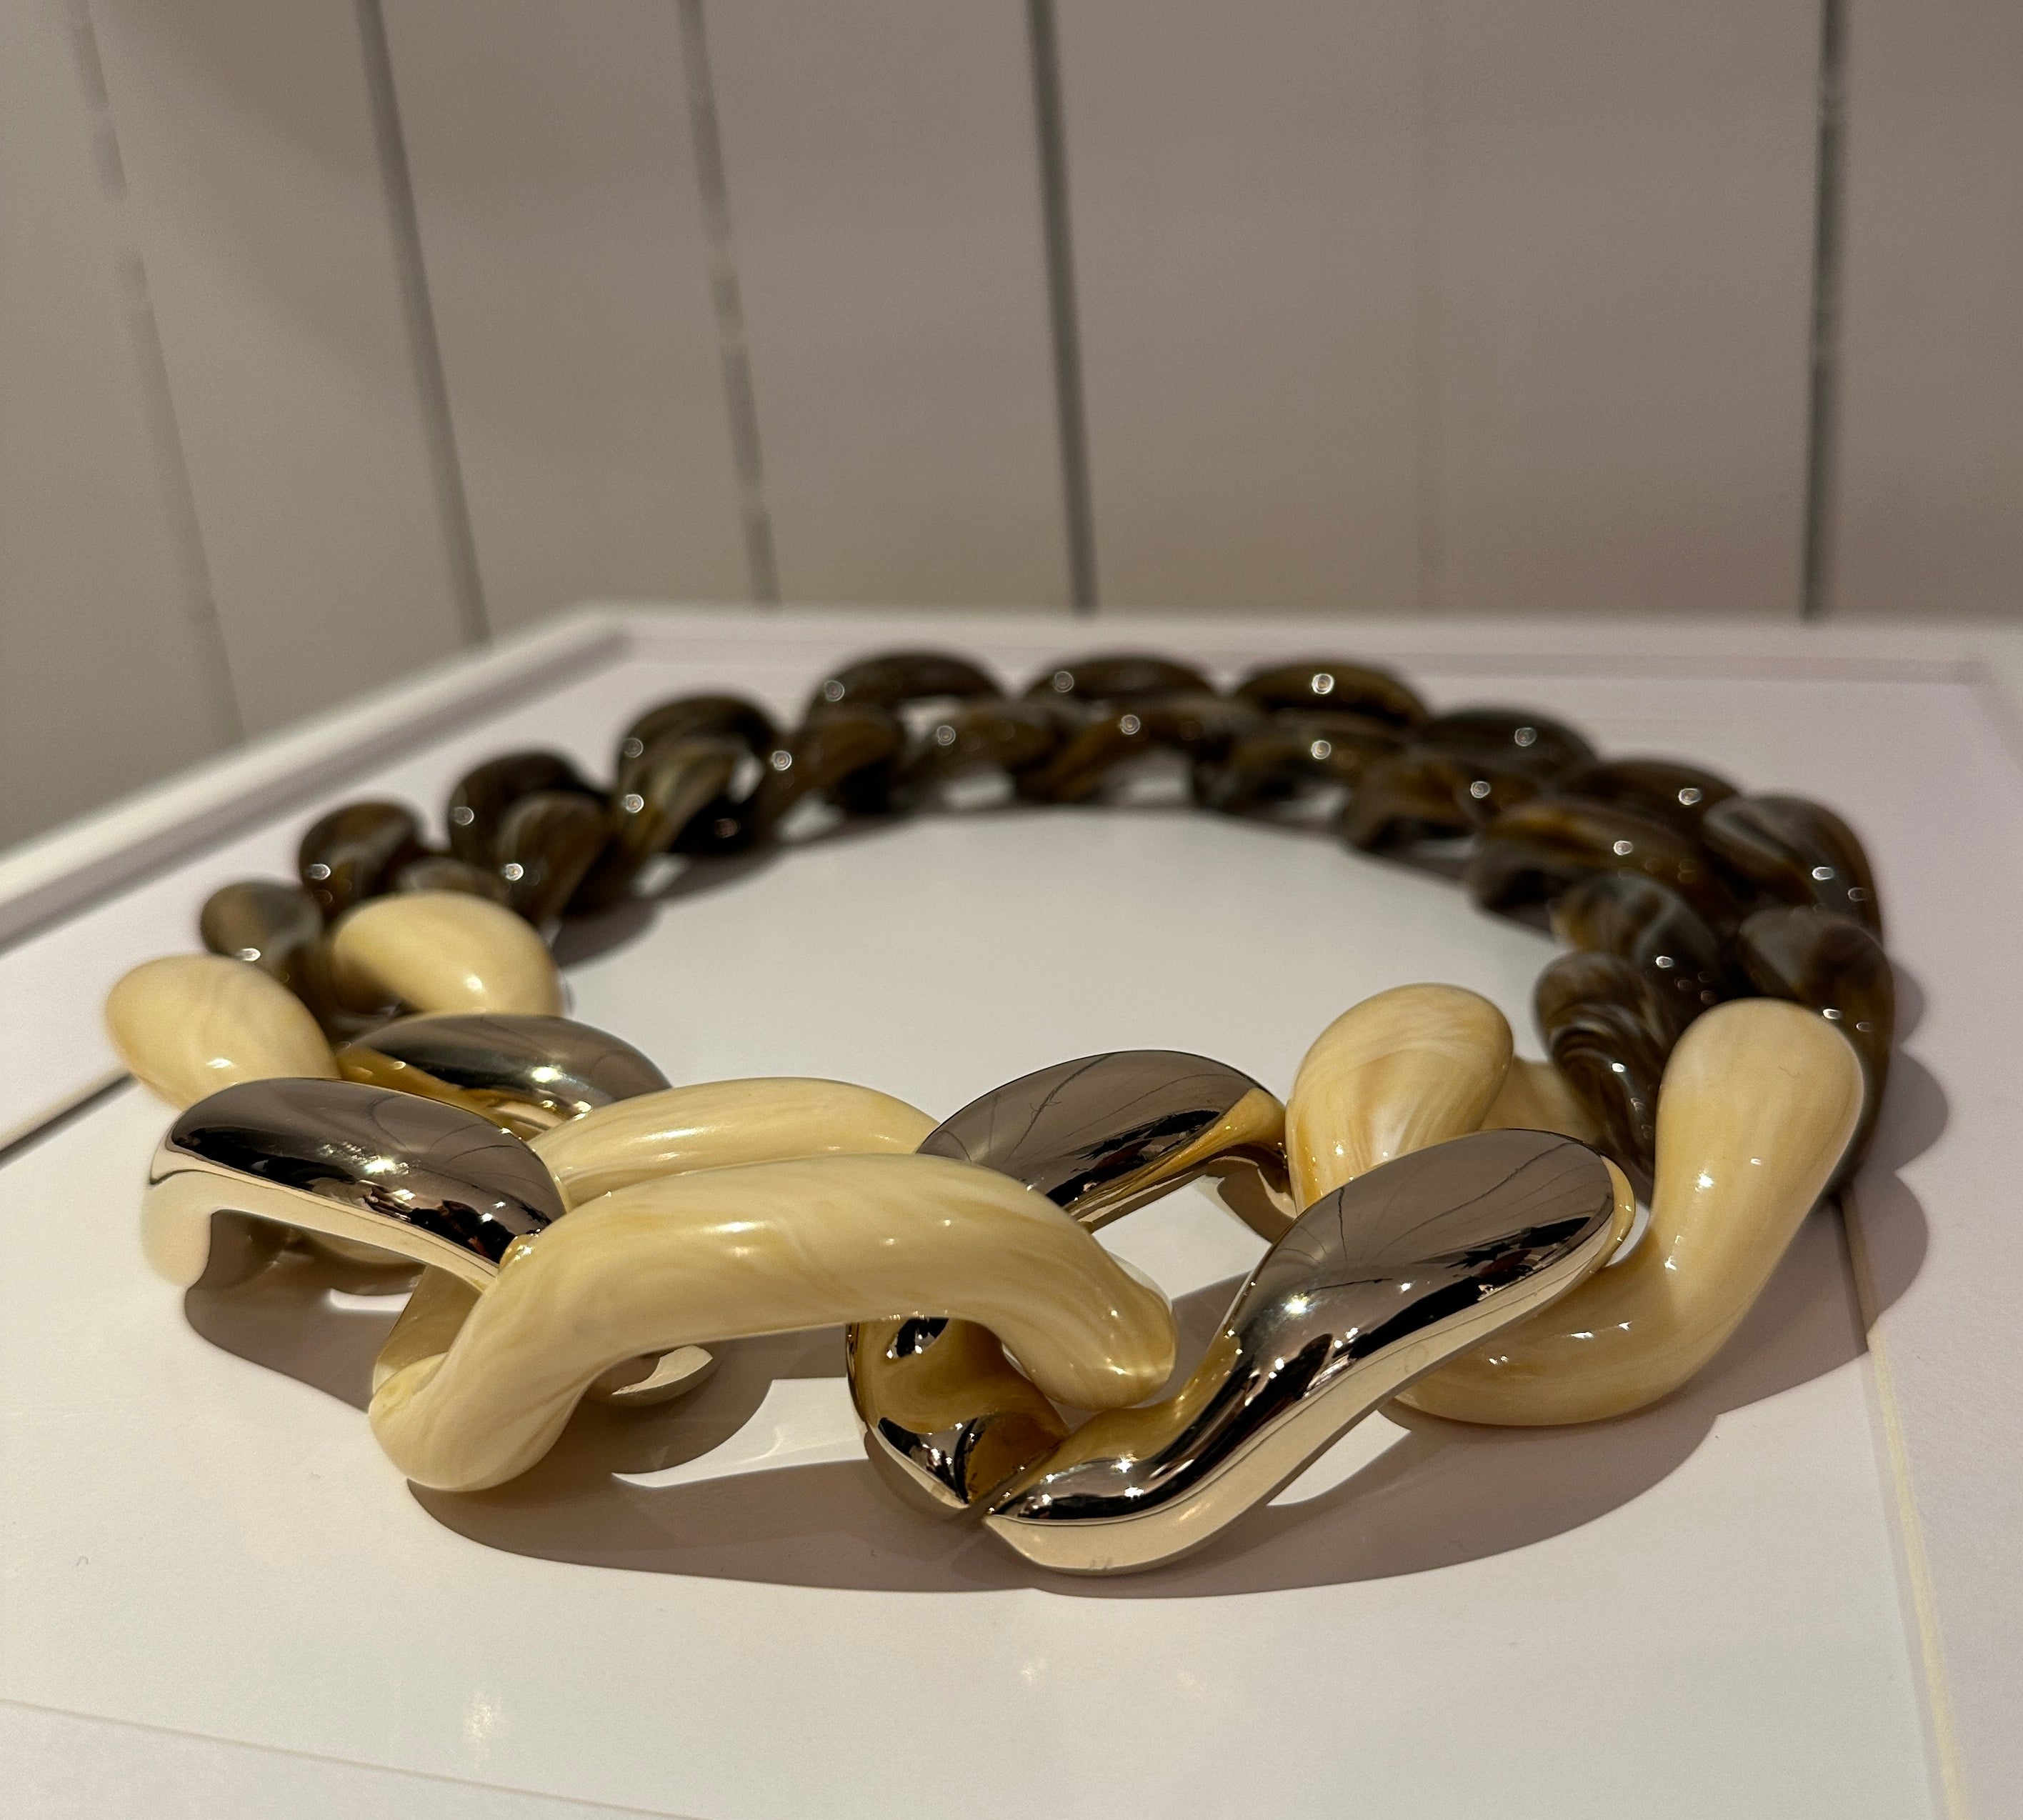 LABEL17 Chain Necklace Laura, pure Resin, Made in Italy